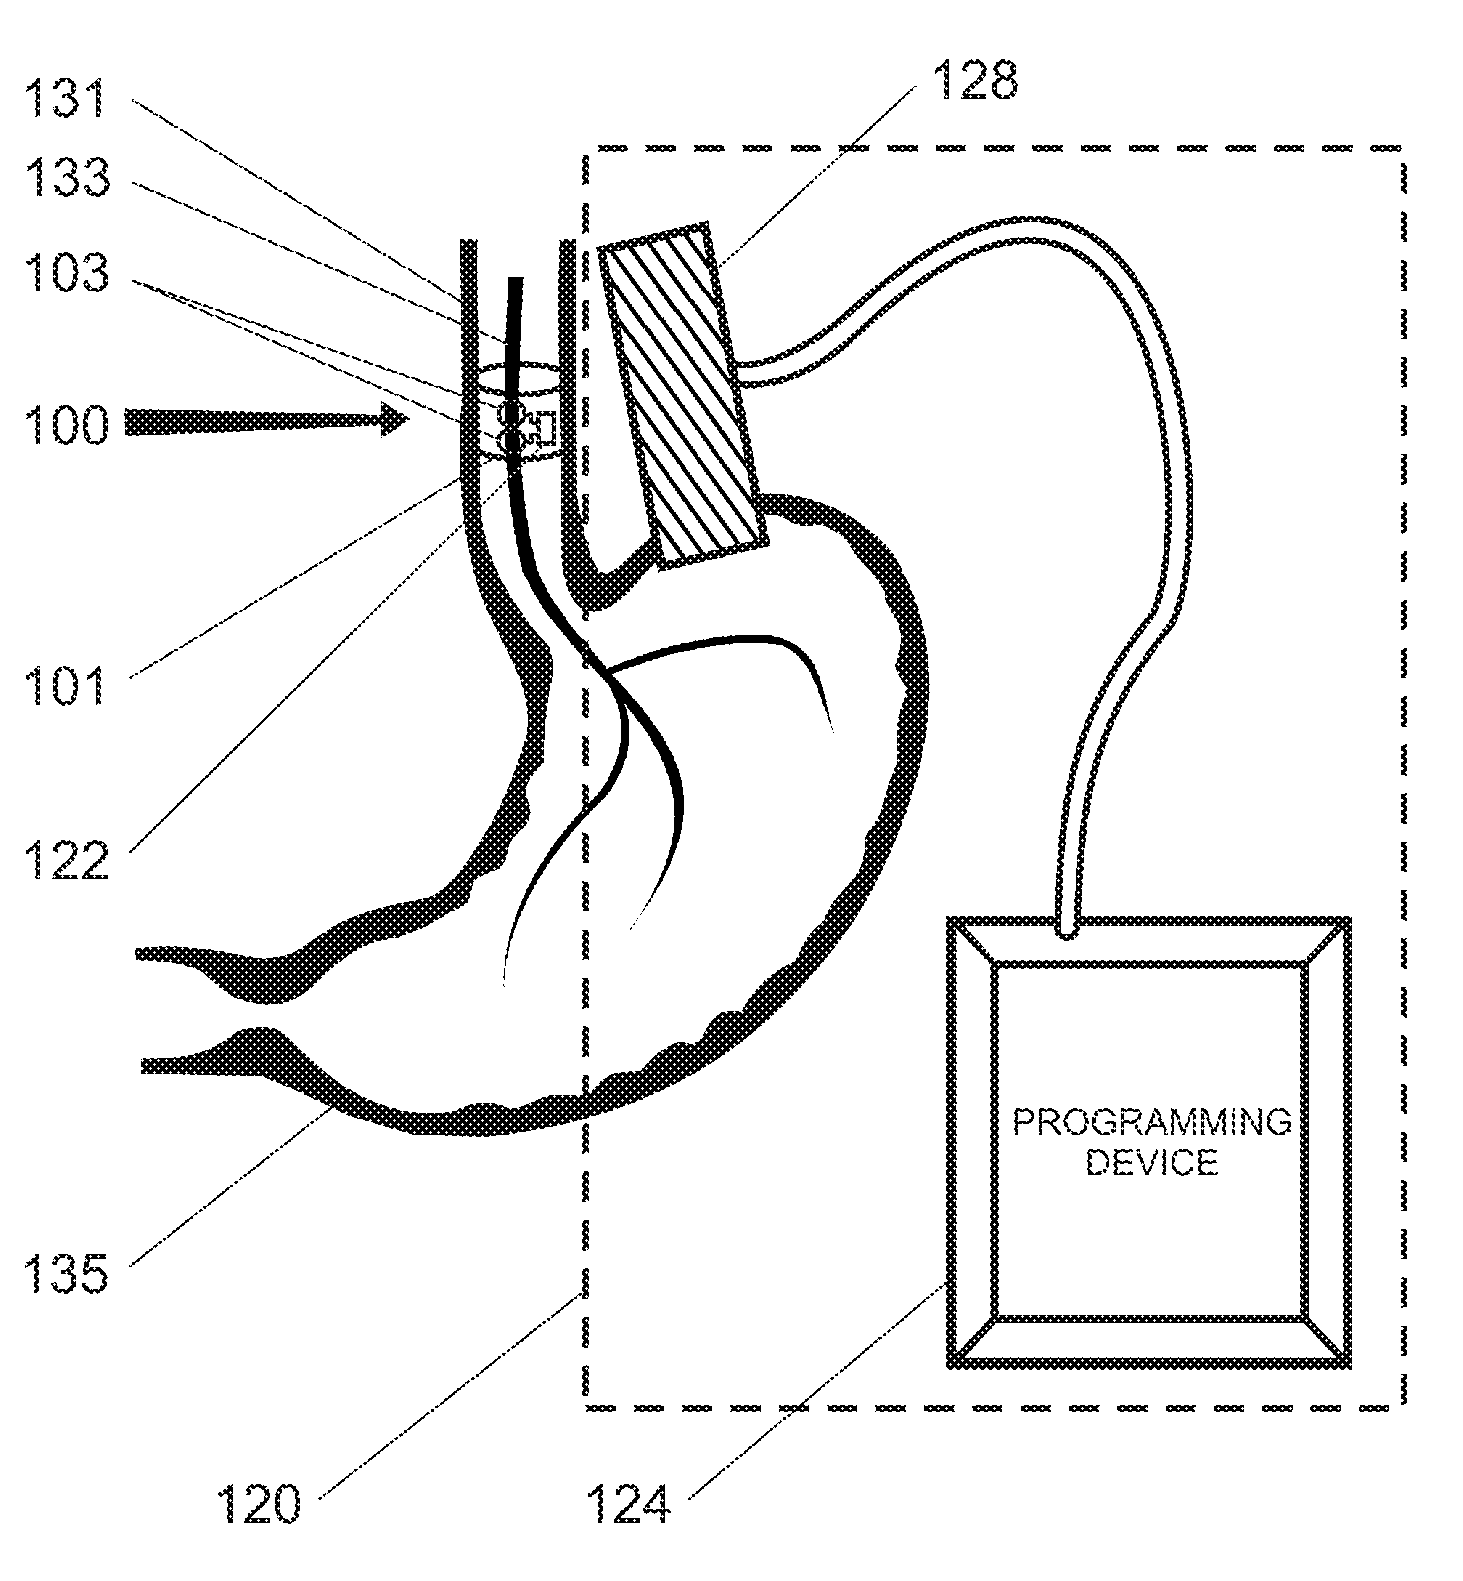 Non-surgical device and methods for trans-esophageal vagus nerve stimulation